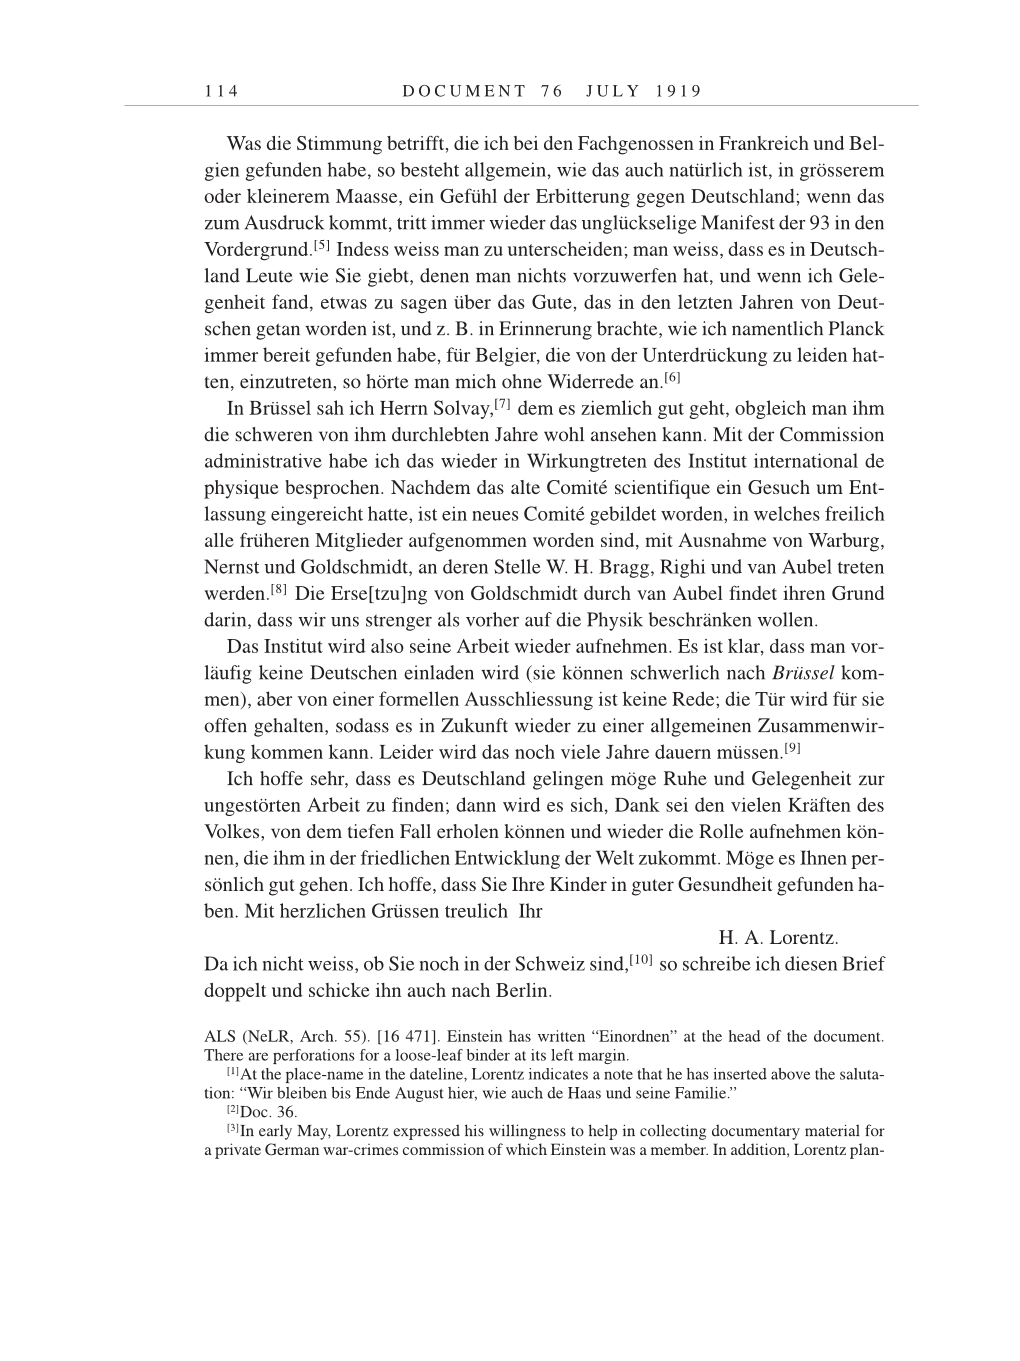 Volume 9: The Berlin Years: Correspondence January 1919-April 1920 page 114